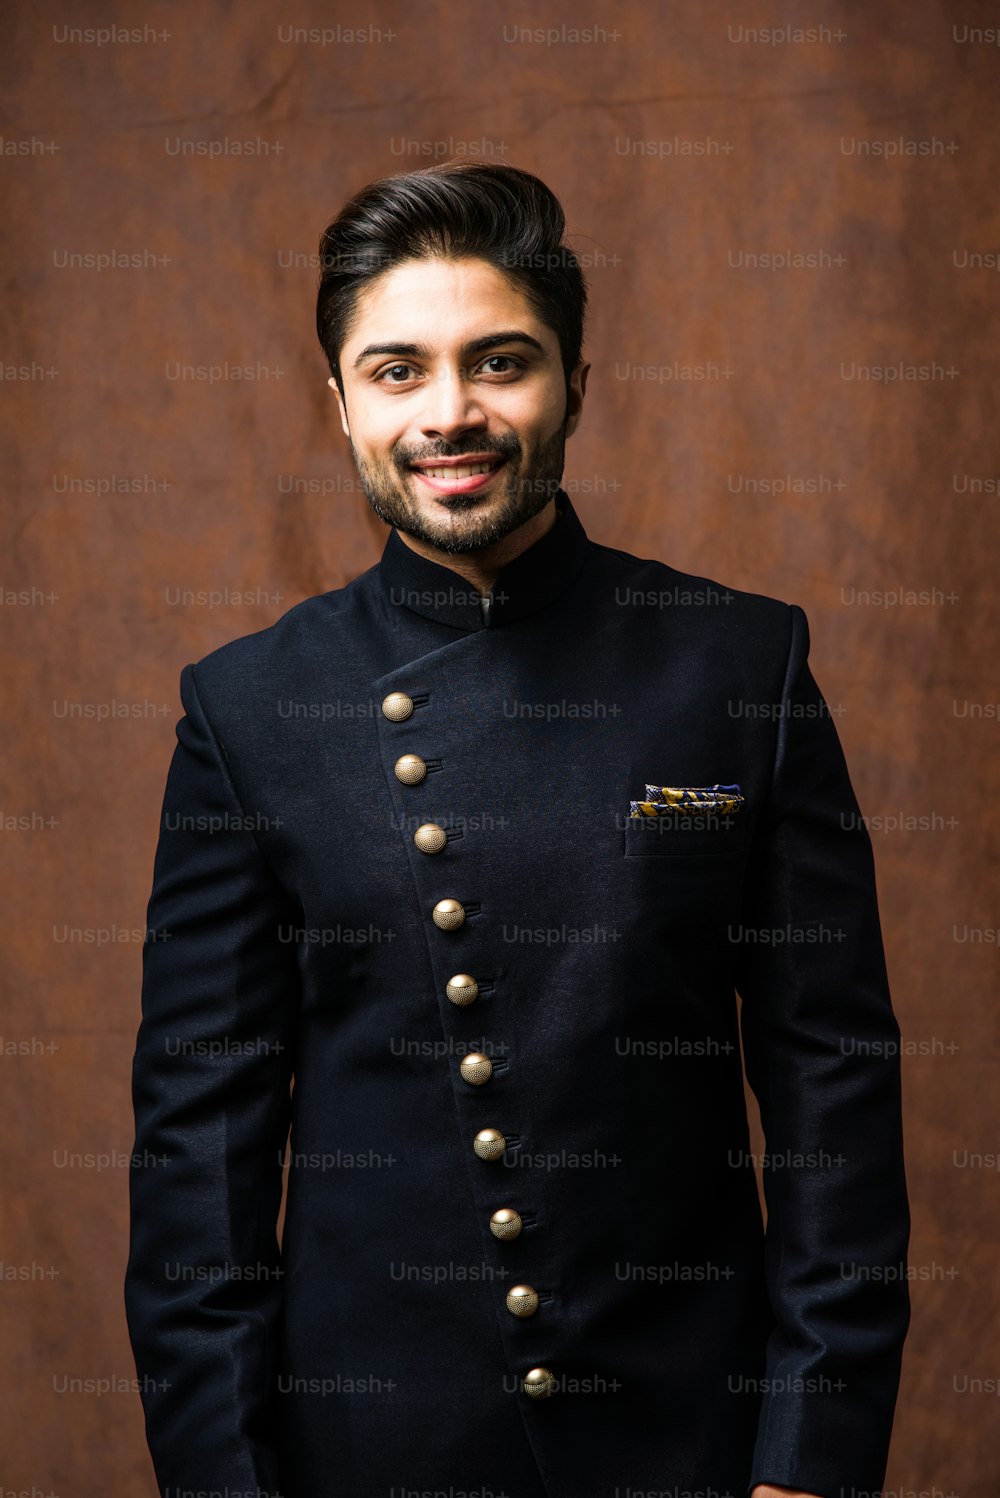 Indian bridegroom wears ethnic or traditional cloths,  Male fashion model with dark blue sherwani, posing / standing against brown grunge background, selective focus